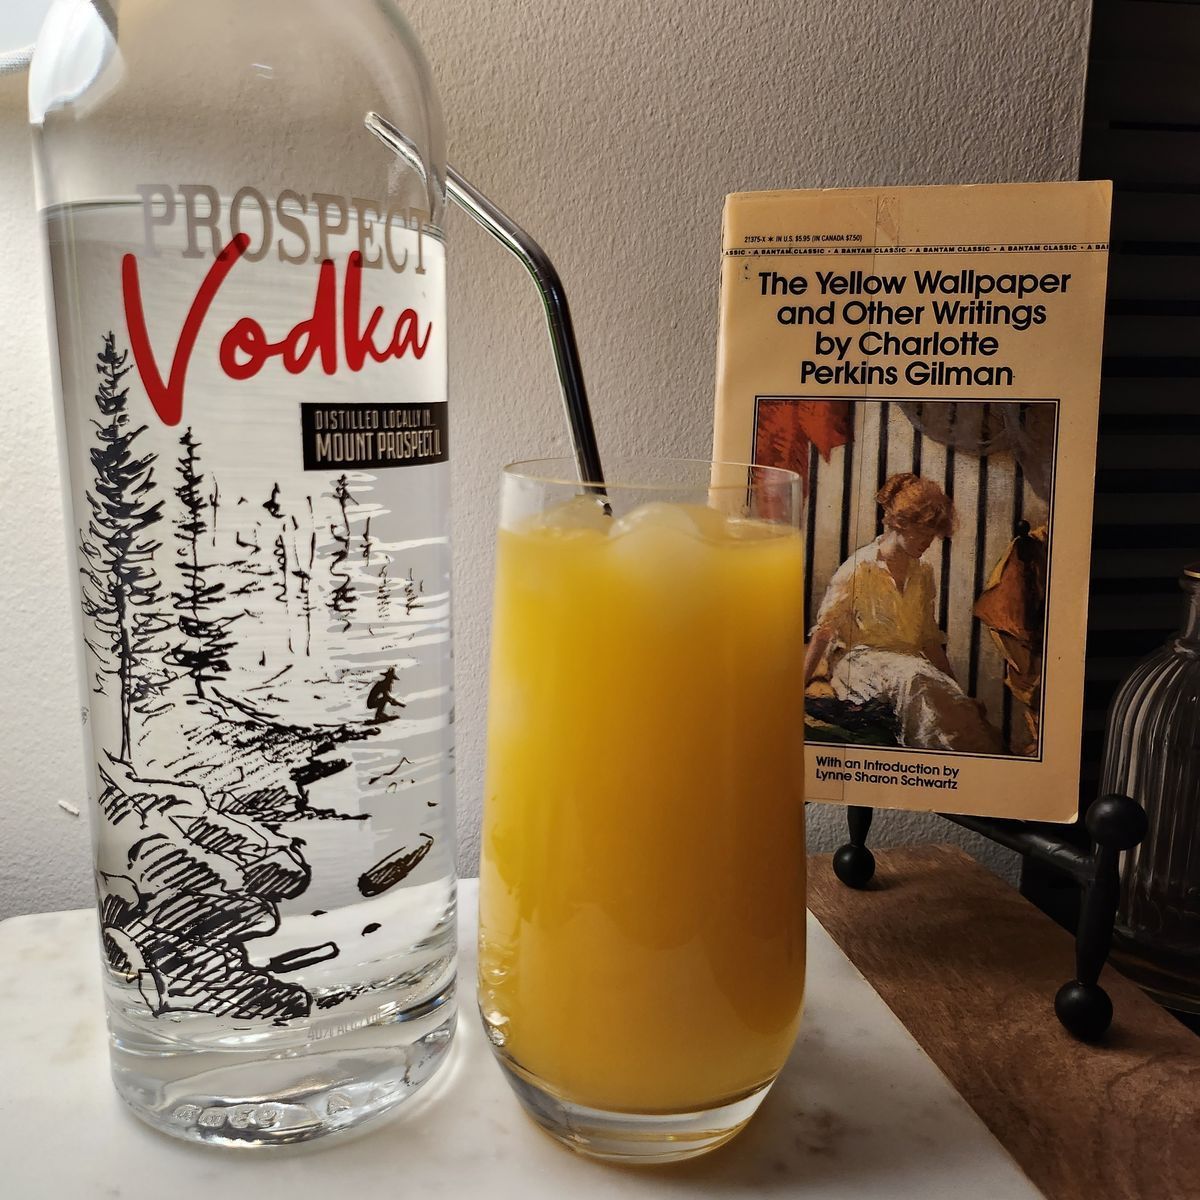 A special thank-you to Two Eagles Distillery for sending me this Vodka to use!

Tonight's drink is my father-in-law's favorite cocktail, and the Prospect Vodka really shines in this version of a Harvey Wallbanger, making for one of the smoothest  vodka cocktails I've ever had.  Cheers!